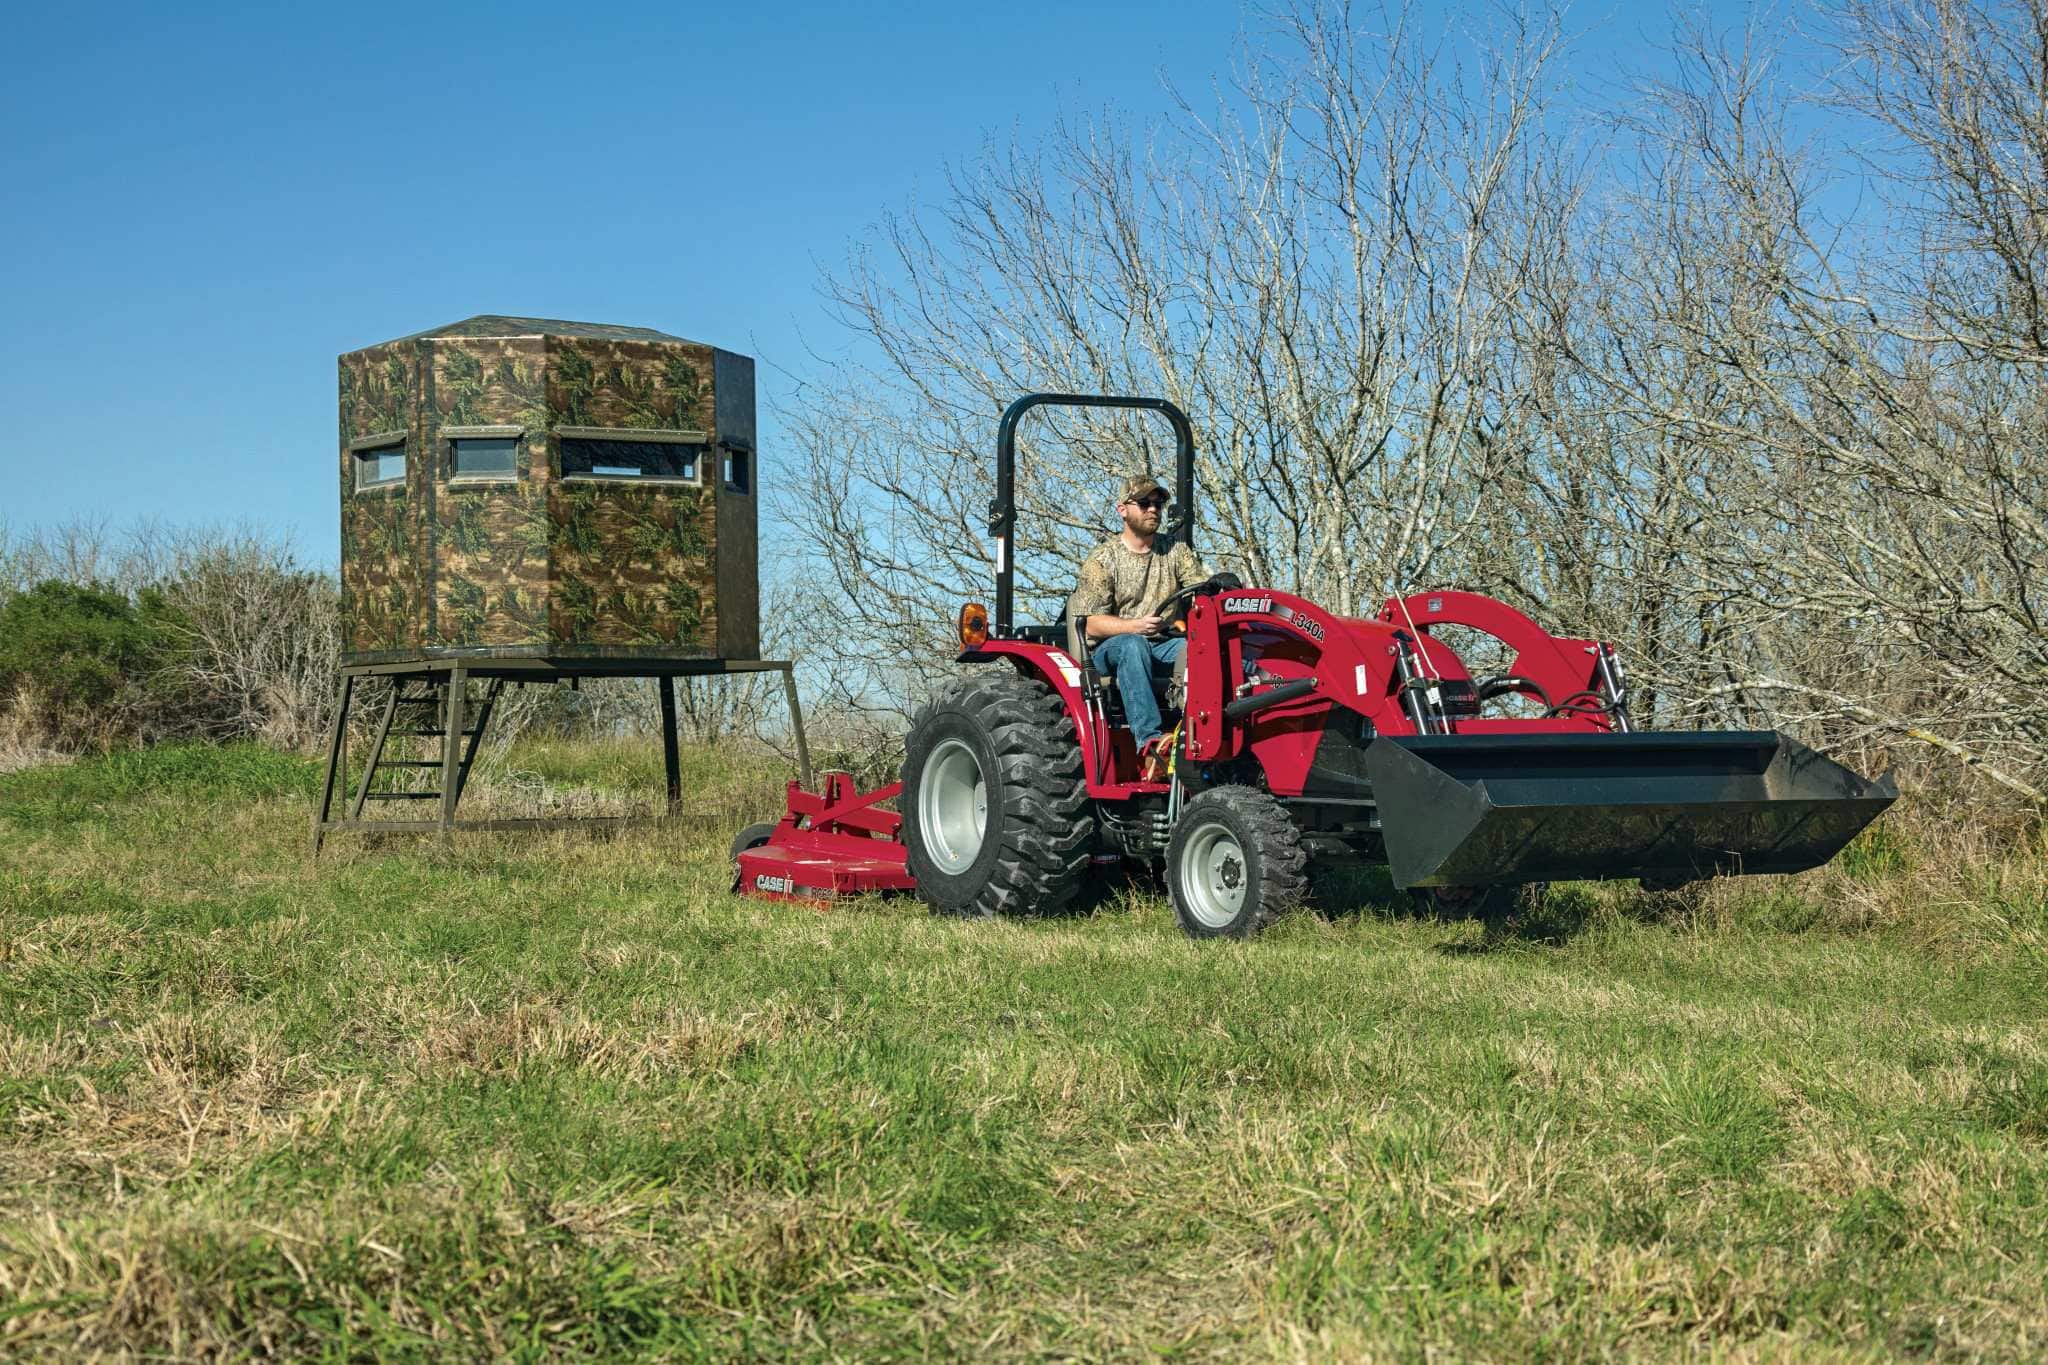 Get Back to Basics with a Reliable, Simple, and Versatile Tractor.